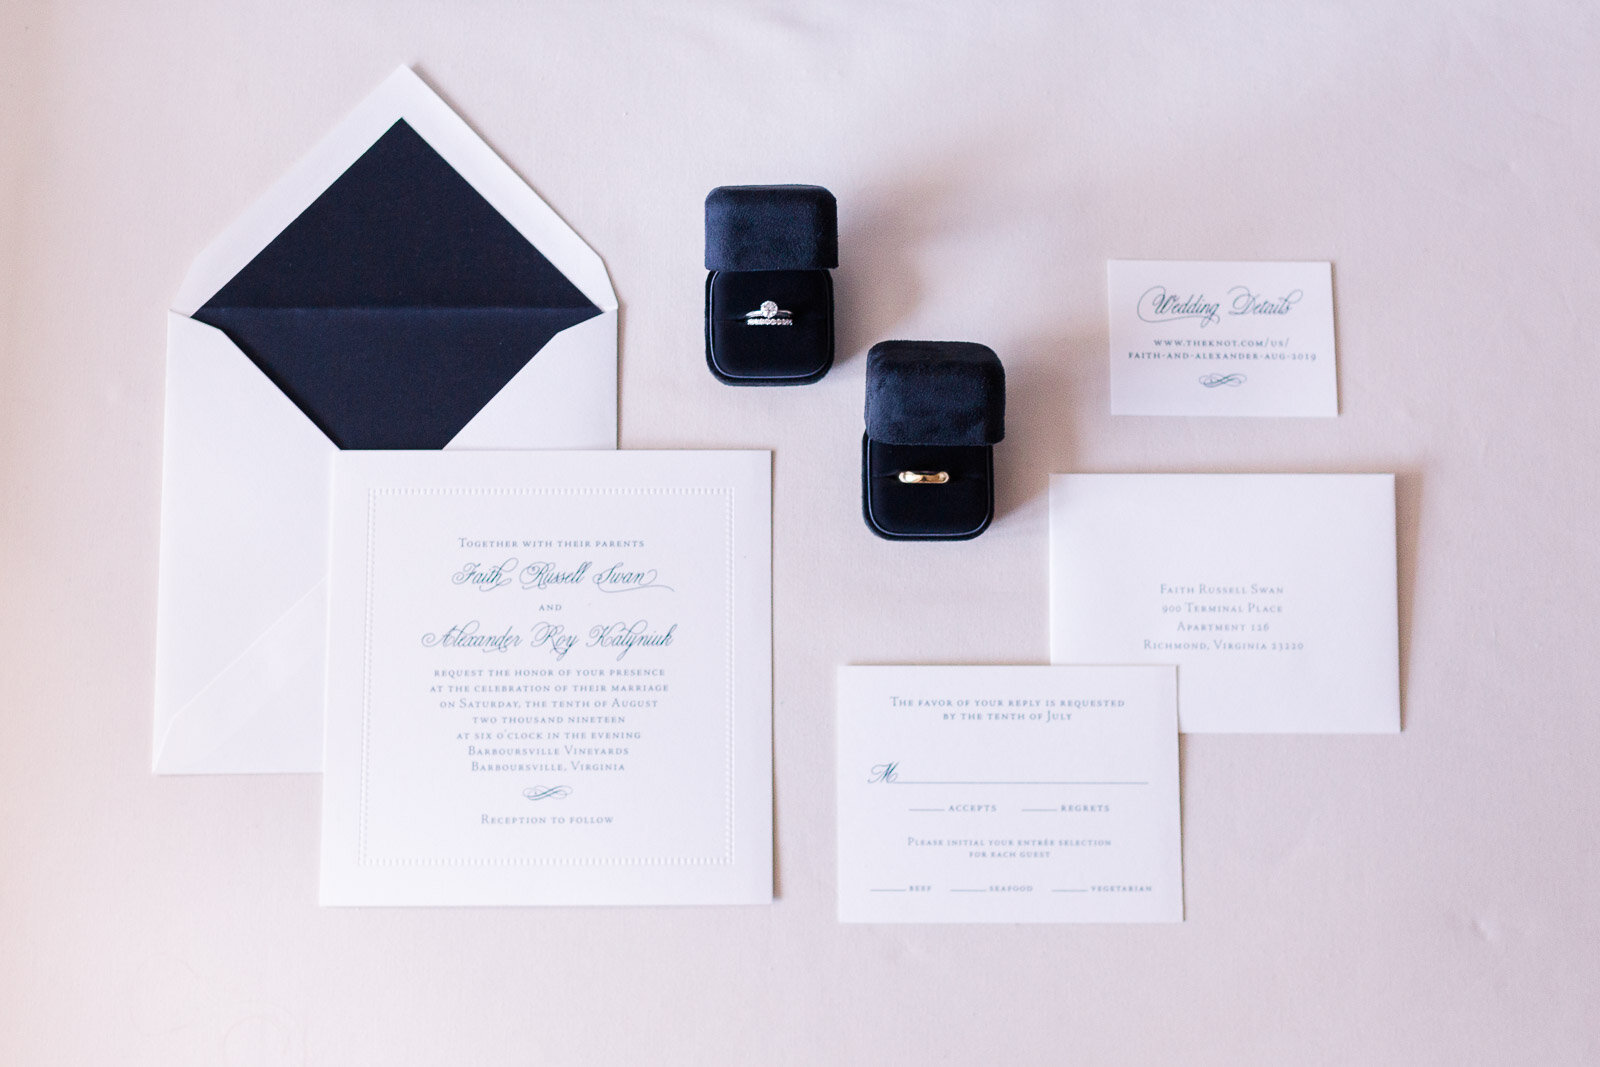 detail-shot-white-and-navy-wedding-invitation-suite-and-wedding-bands-on-flatlay